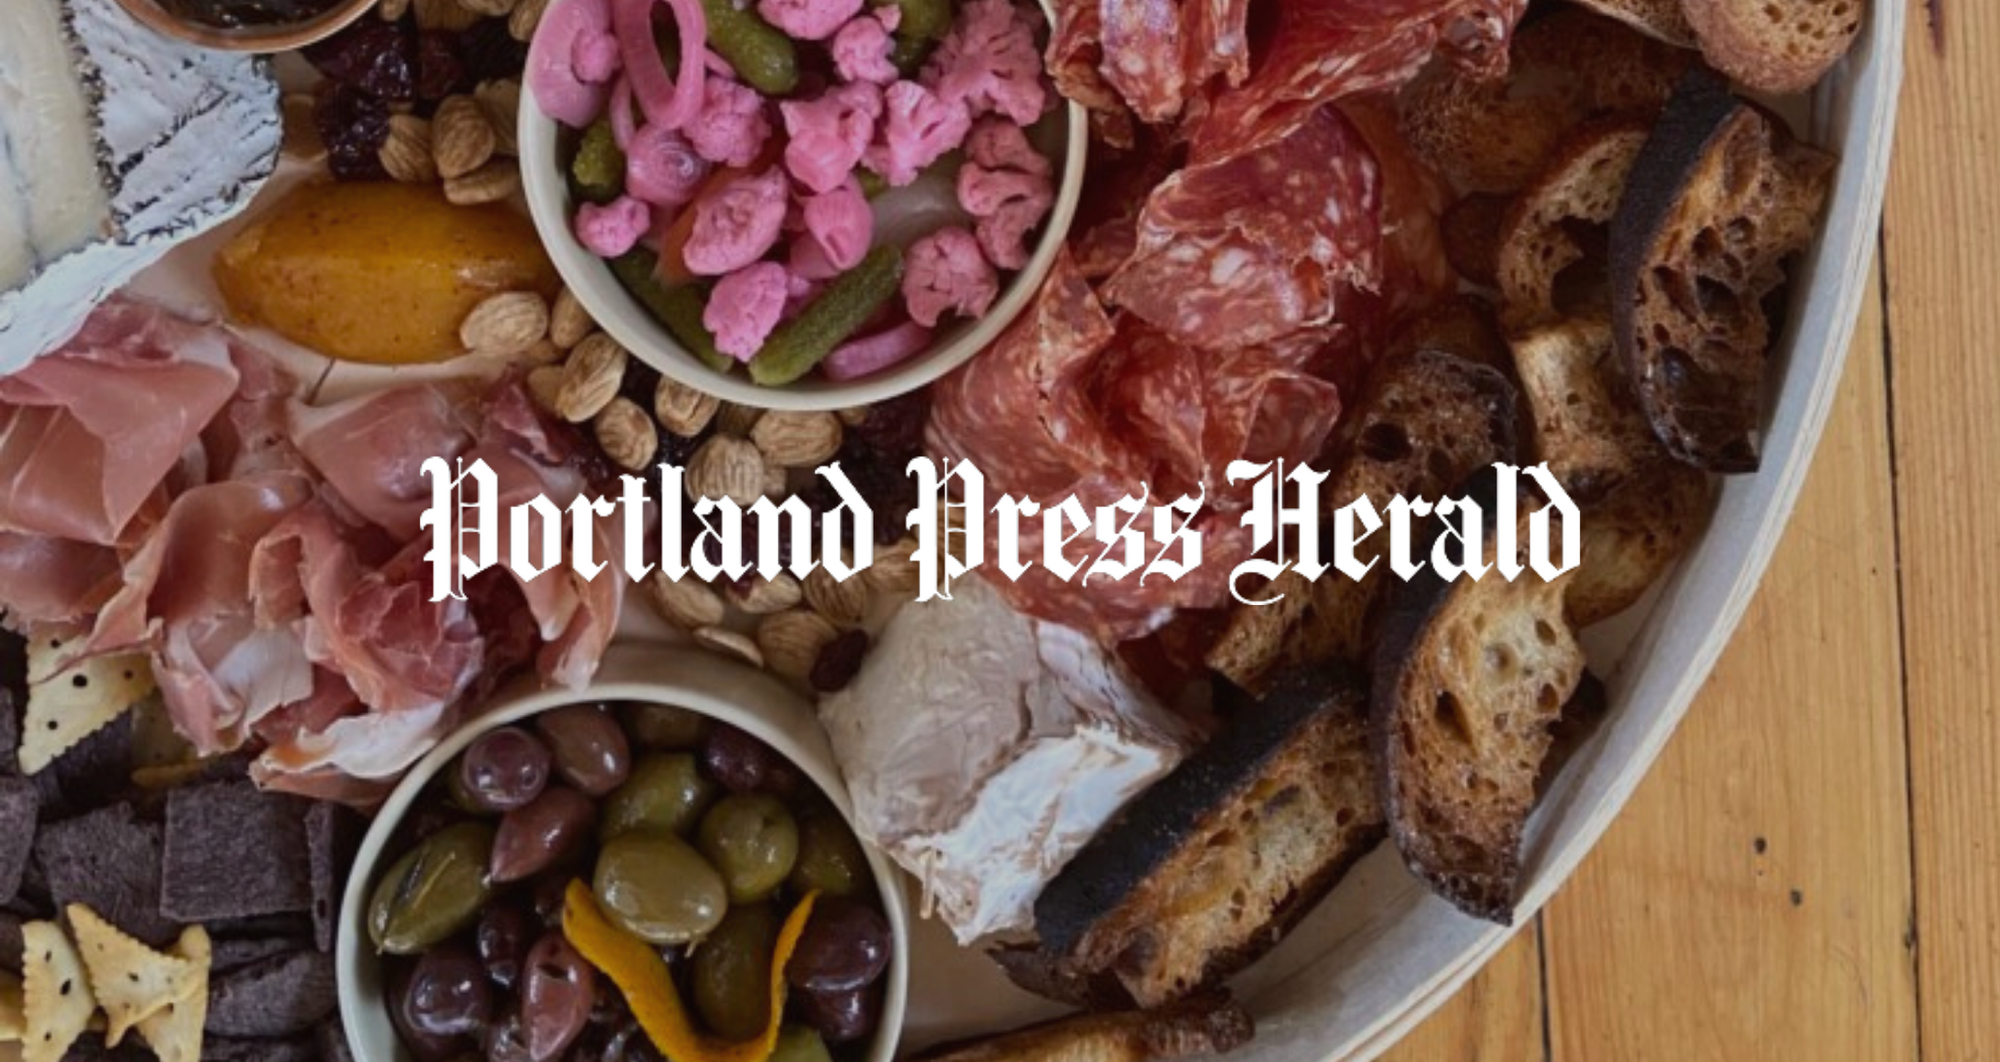 Charcuterie and Cheese Boards On Trend in Southern Maine